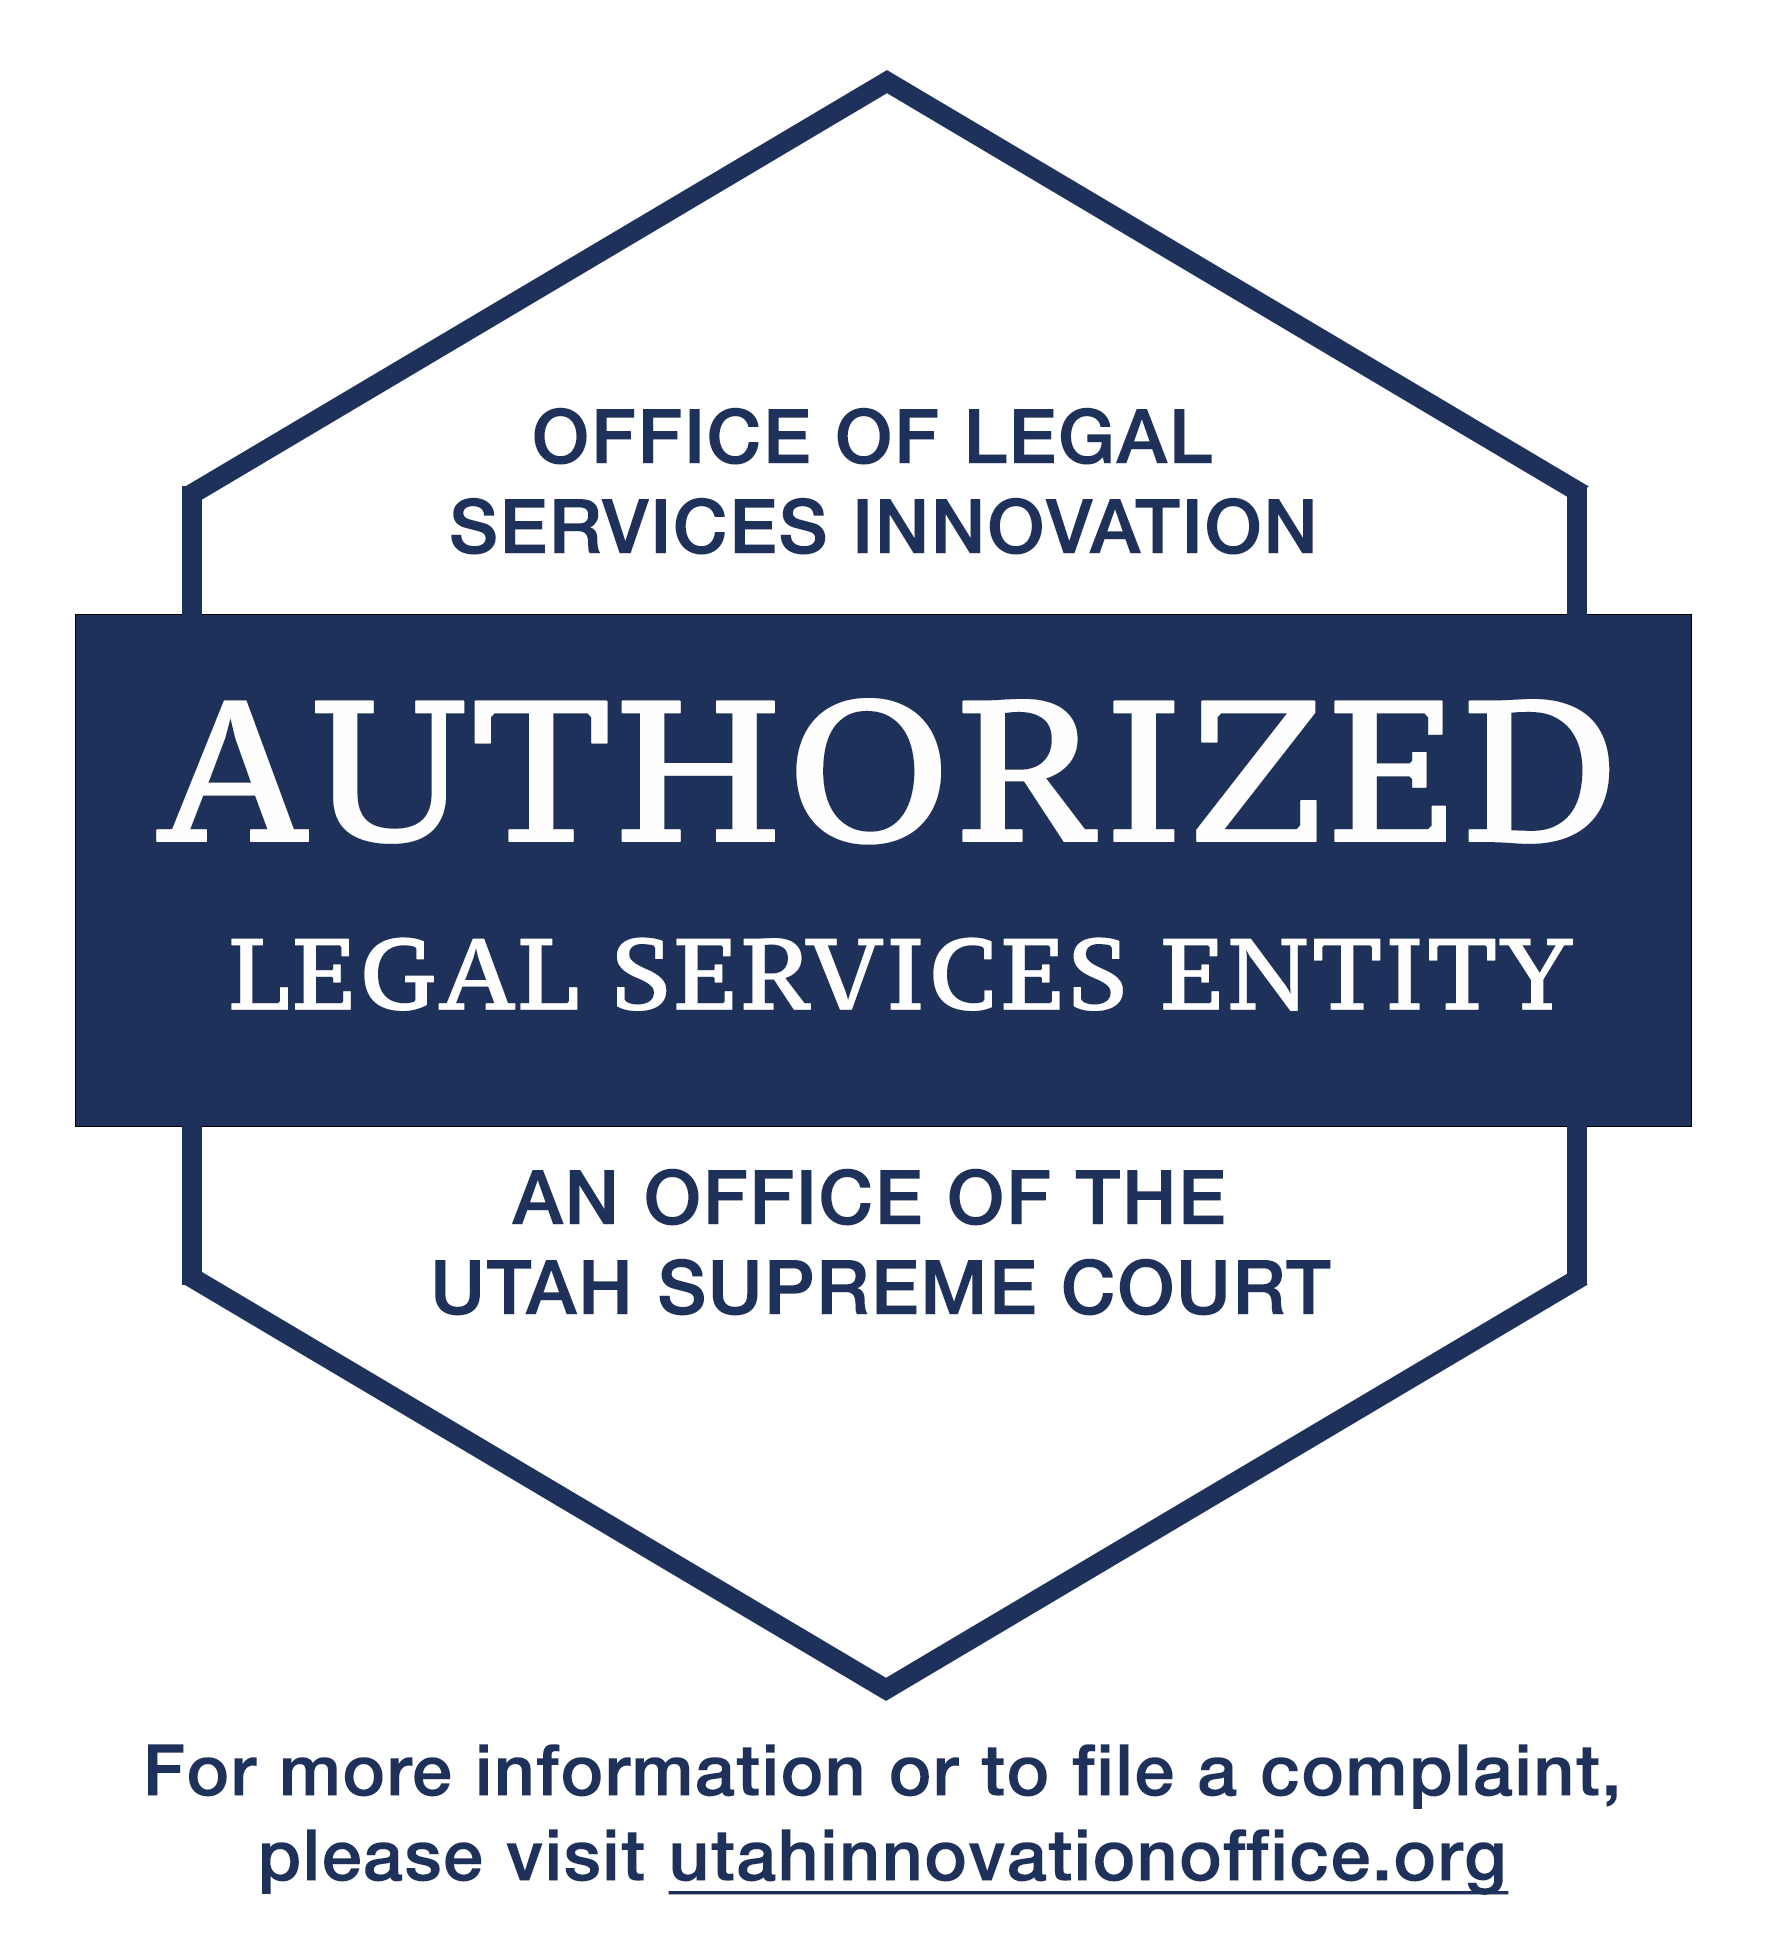 Office of Legal Services Innovation - Authorized Legal Services Entity - An Office of the Utah Supreme Court